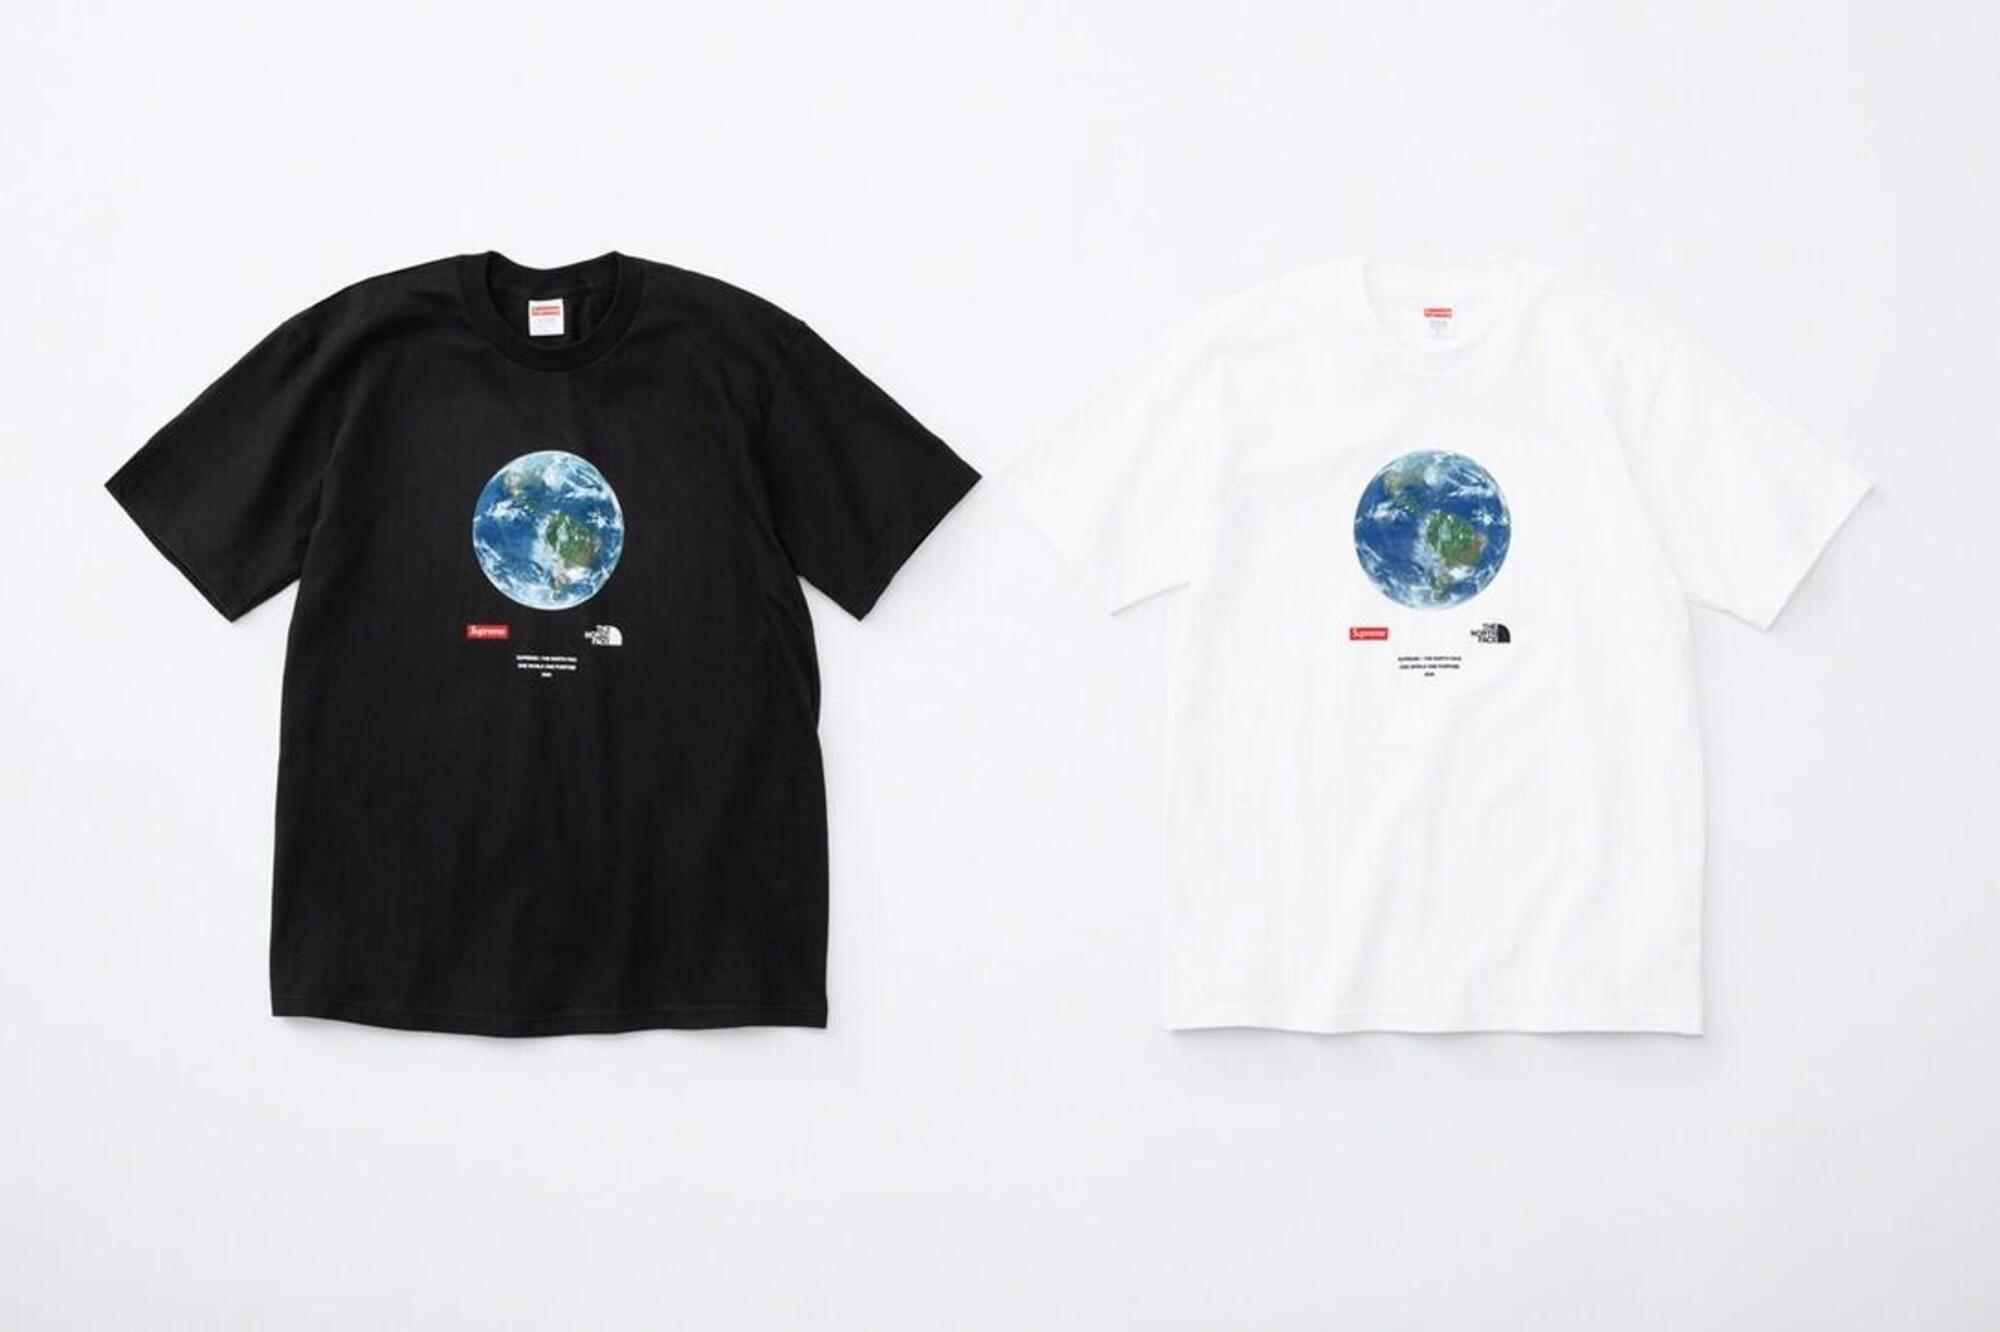 Supreme x The North Face one world tee